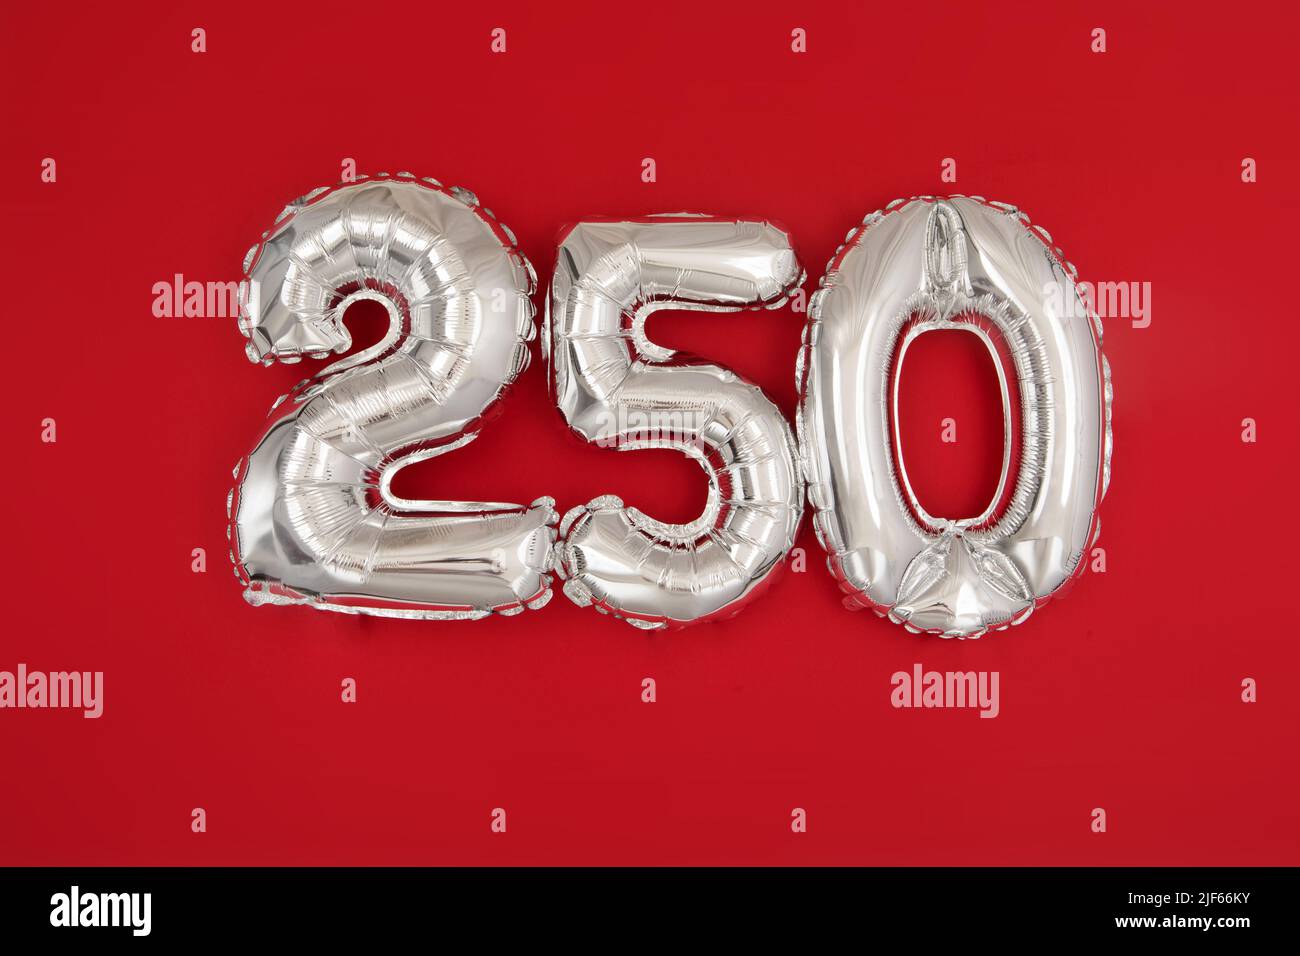 Silver balloon showing number 250 on red background Stock Photo